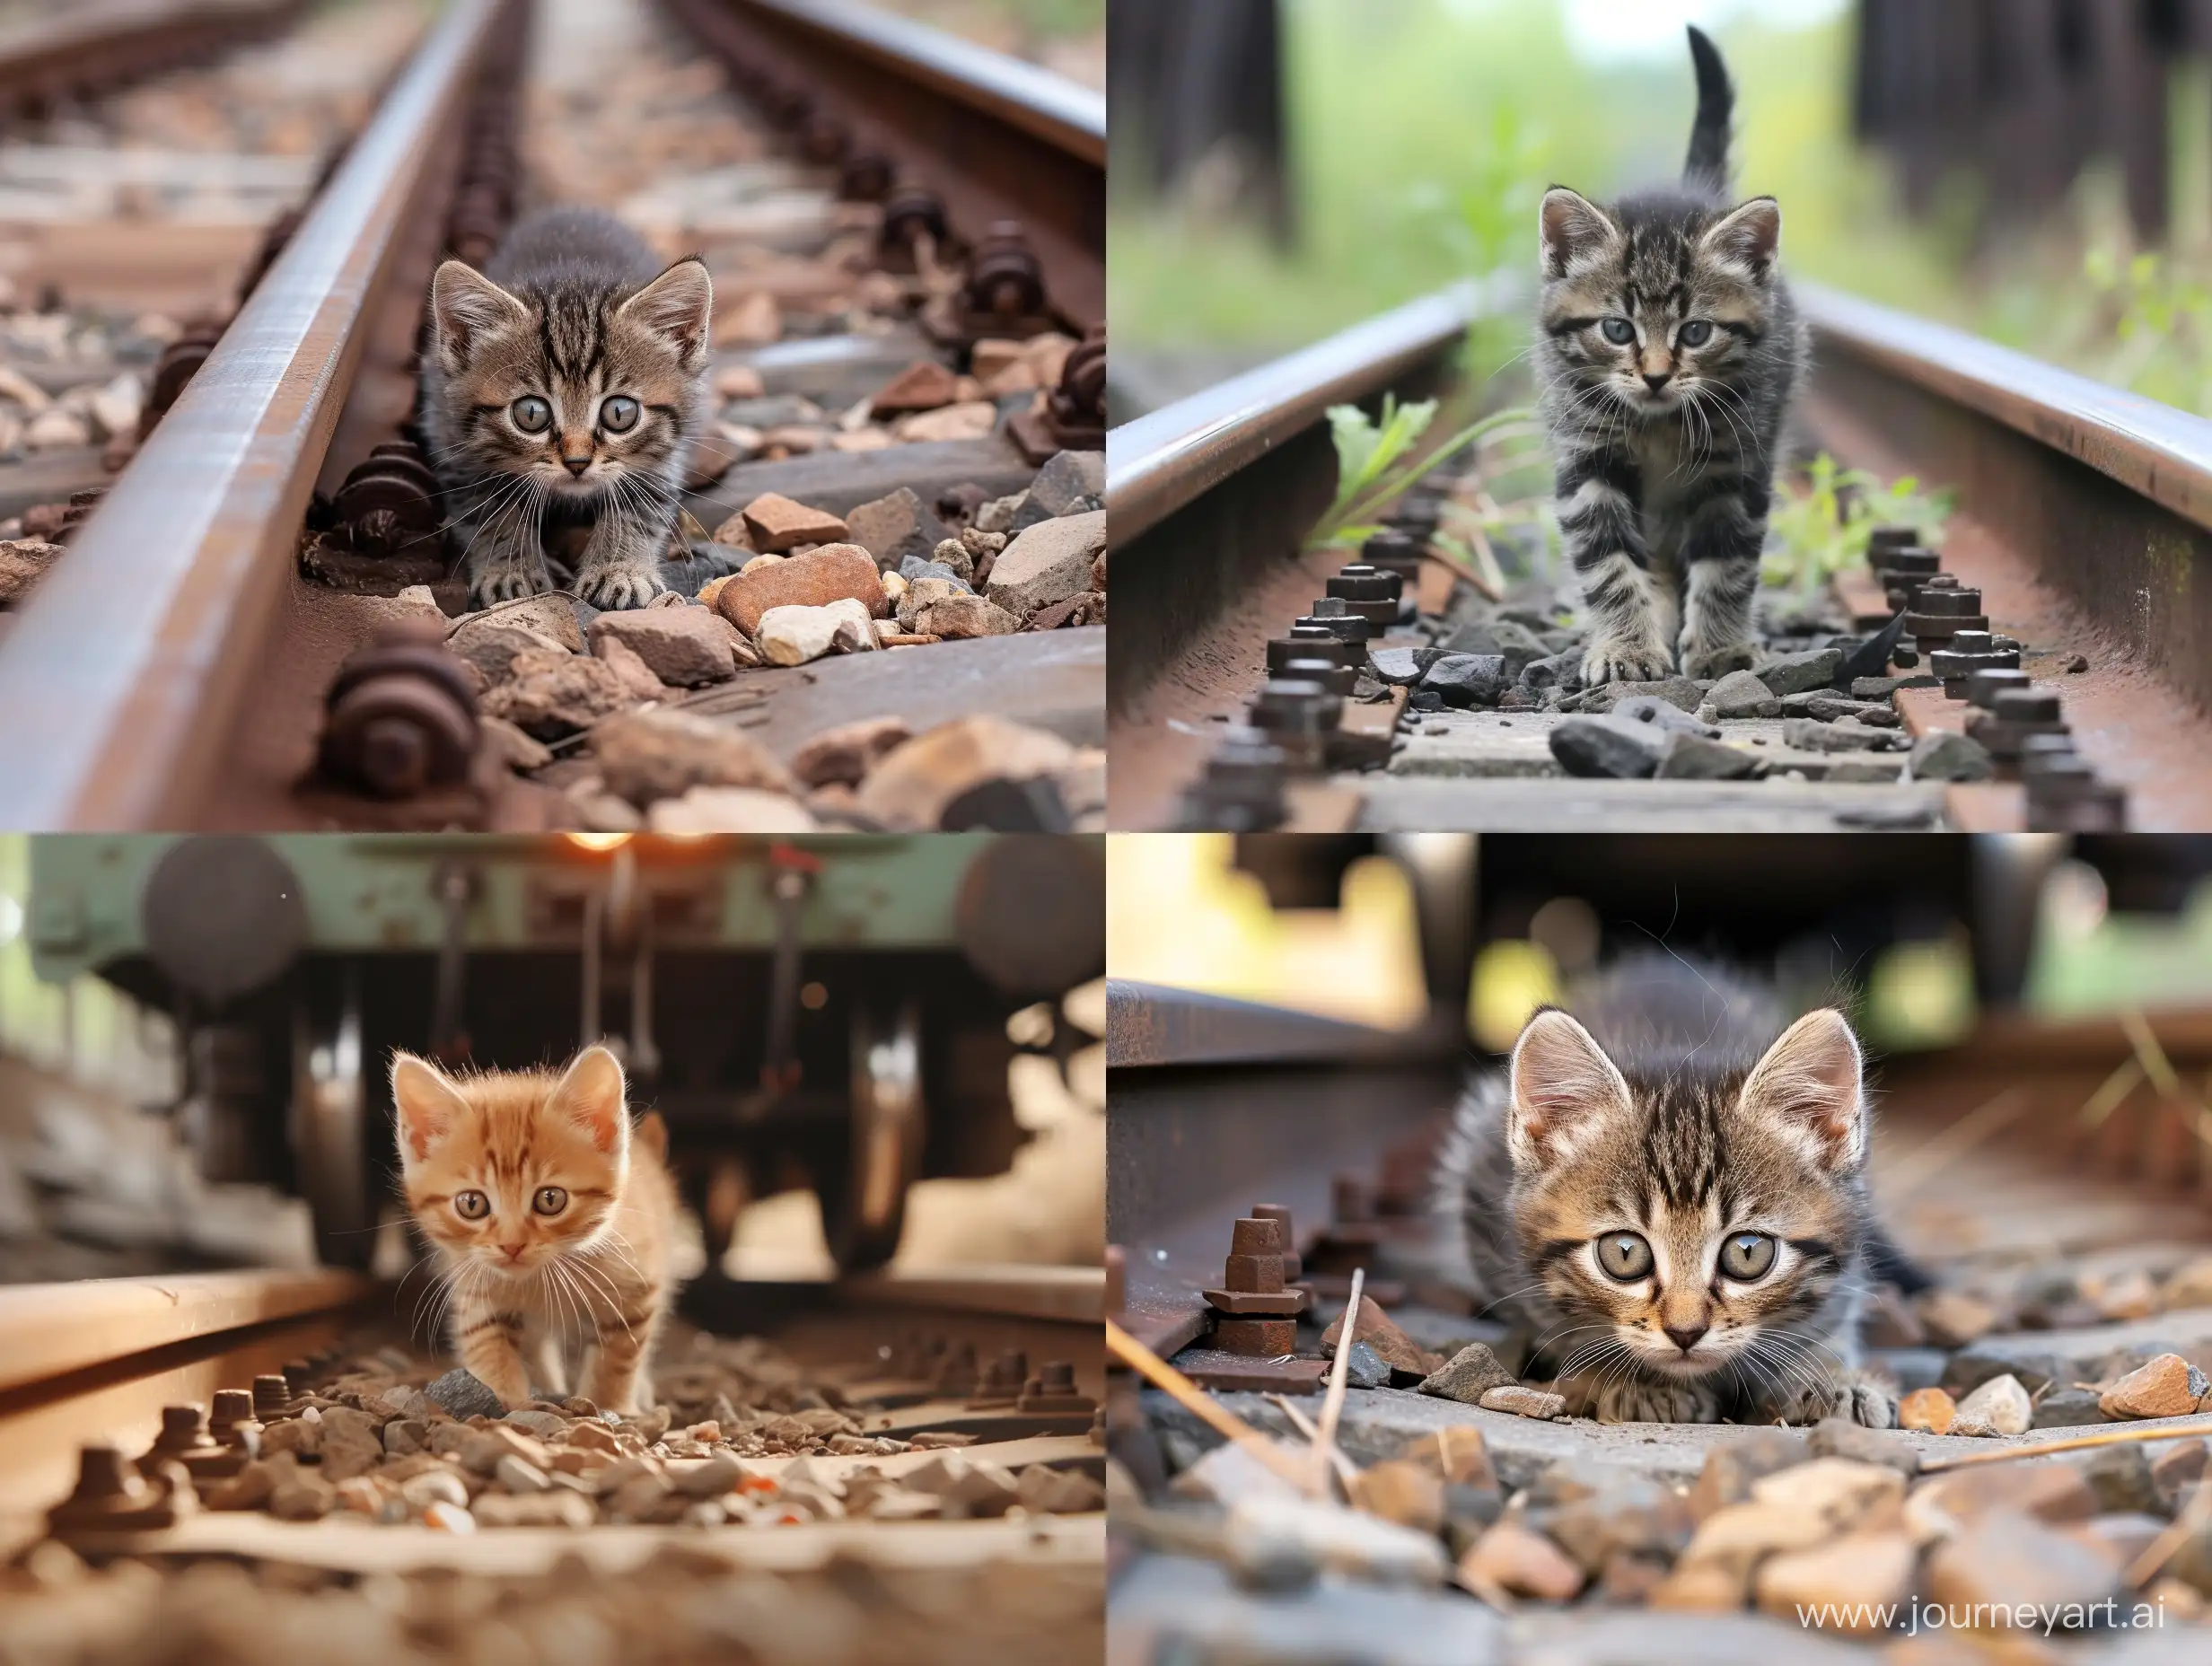 the kitten was thrown under the rails and a train is coming from behind